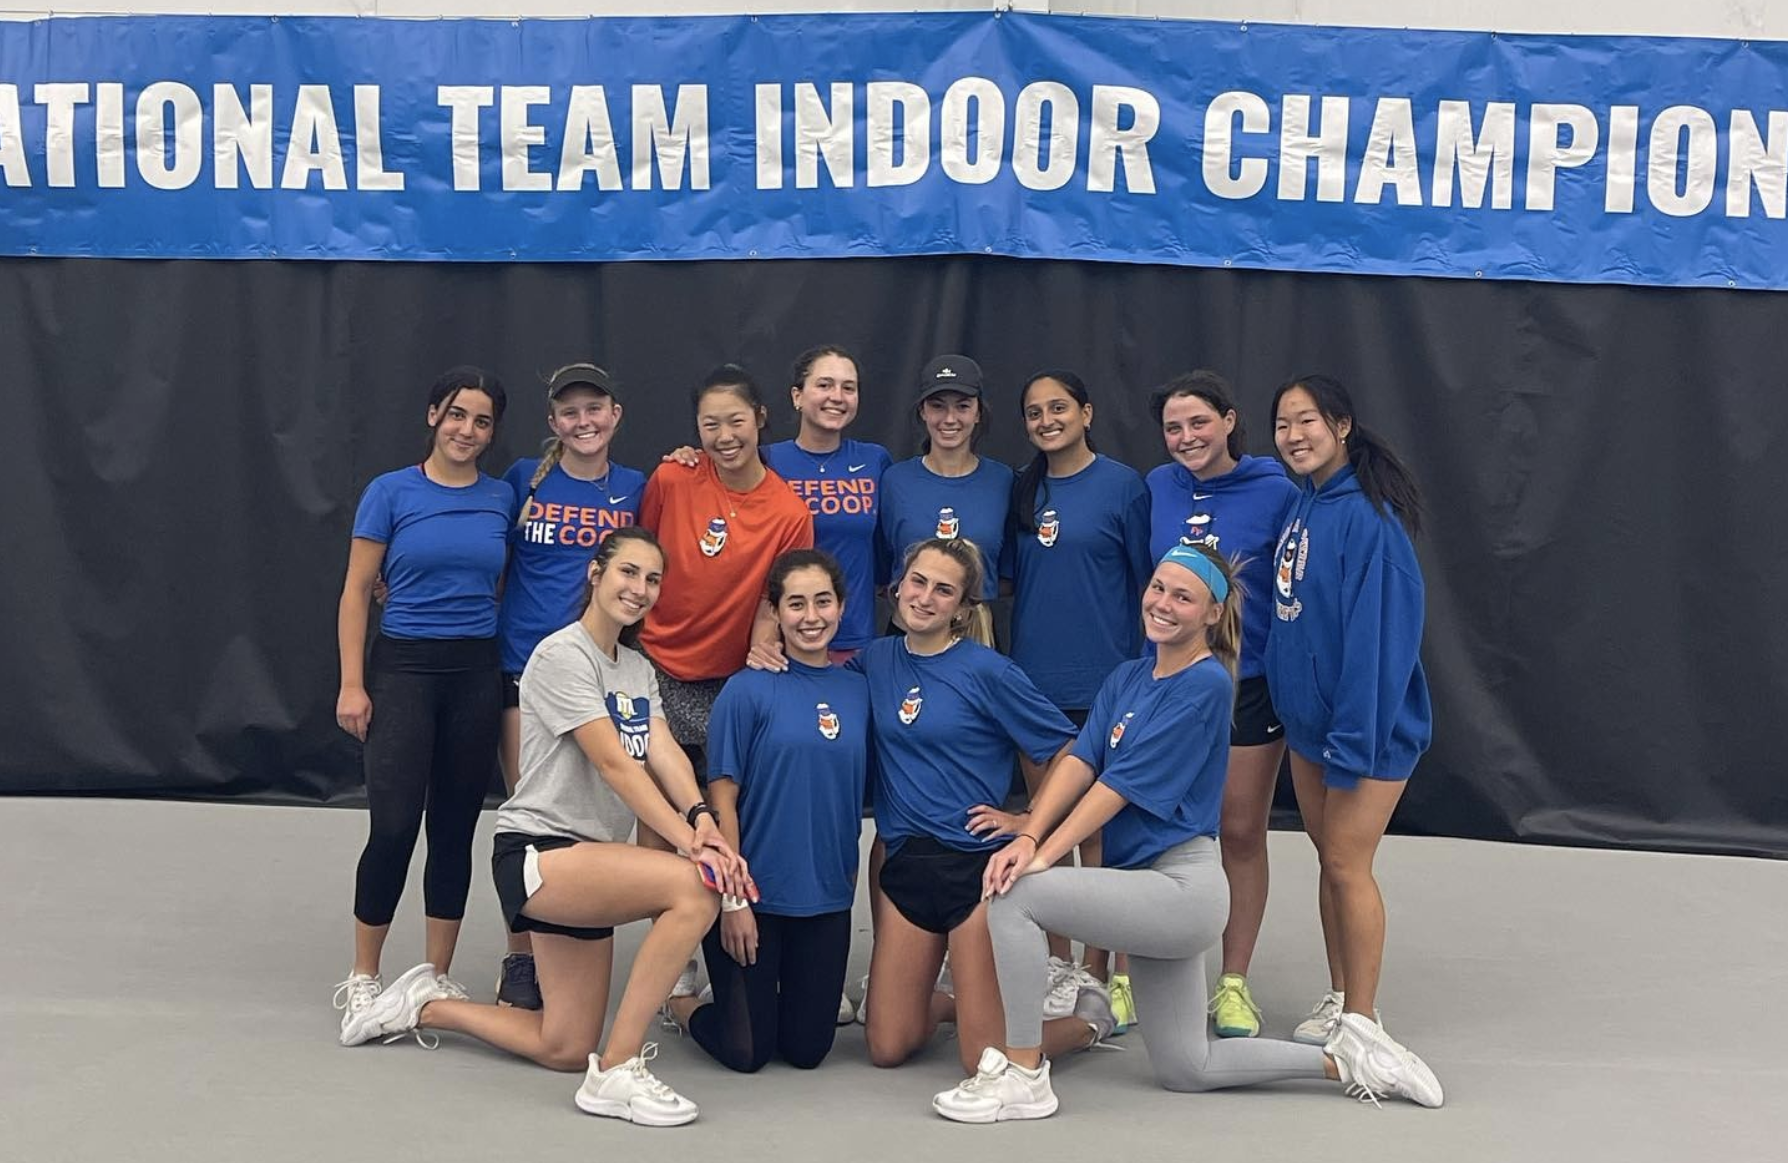 The PPWT Team at the 2022 ITA DIII National Indoor Championship in Hen-tucky